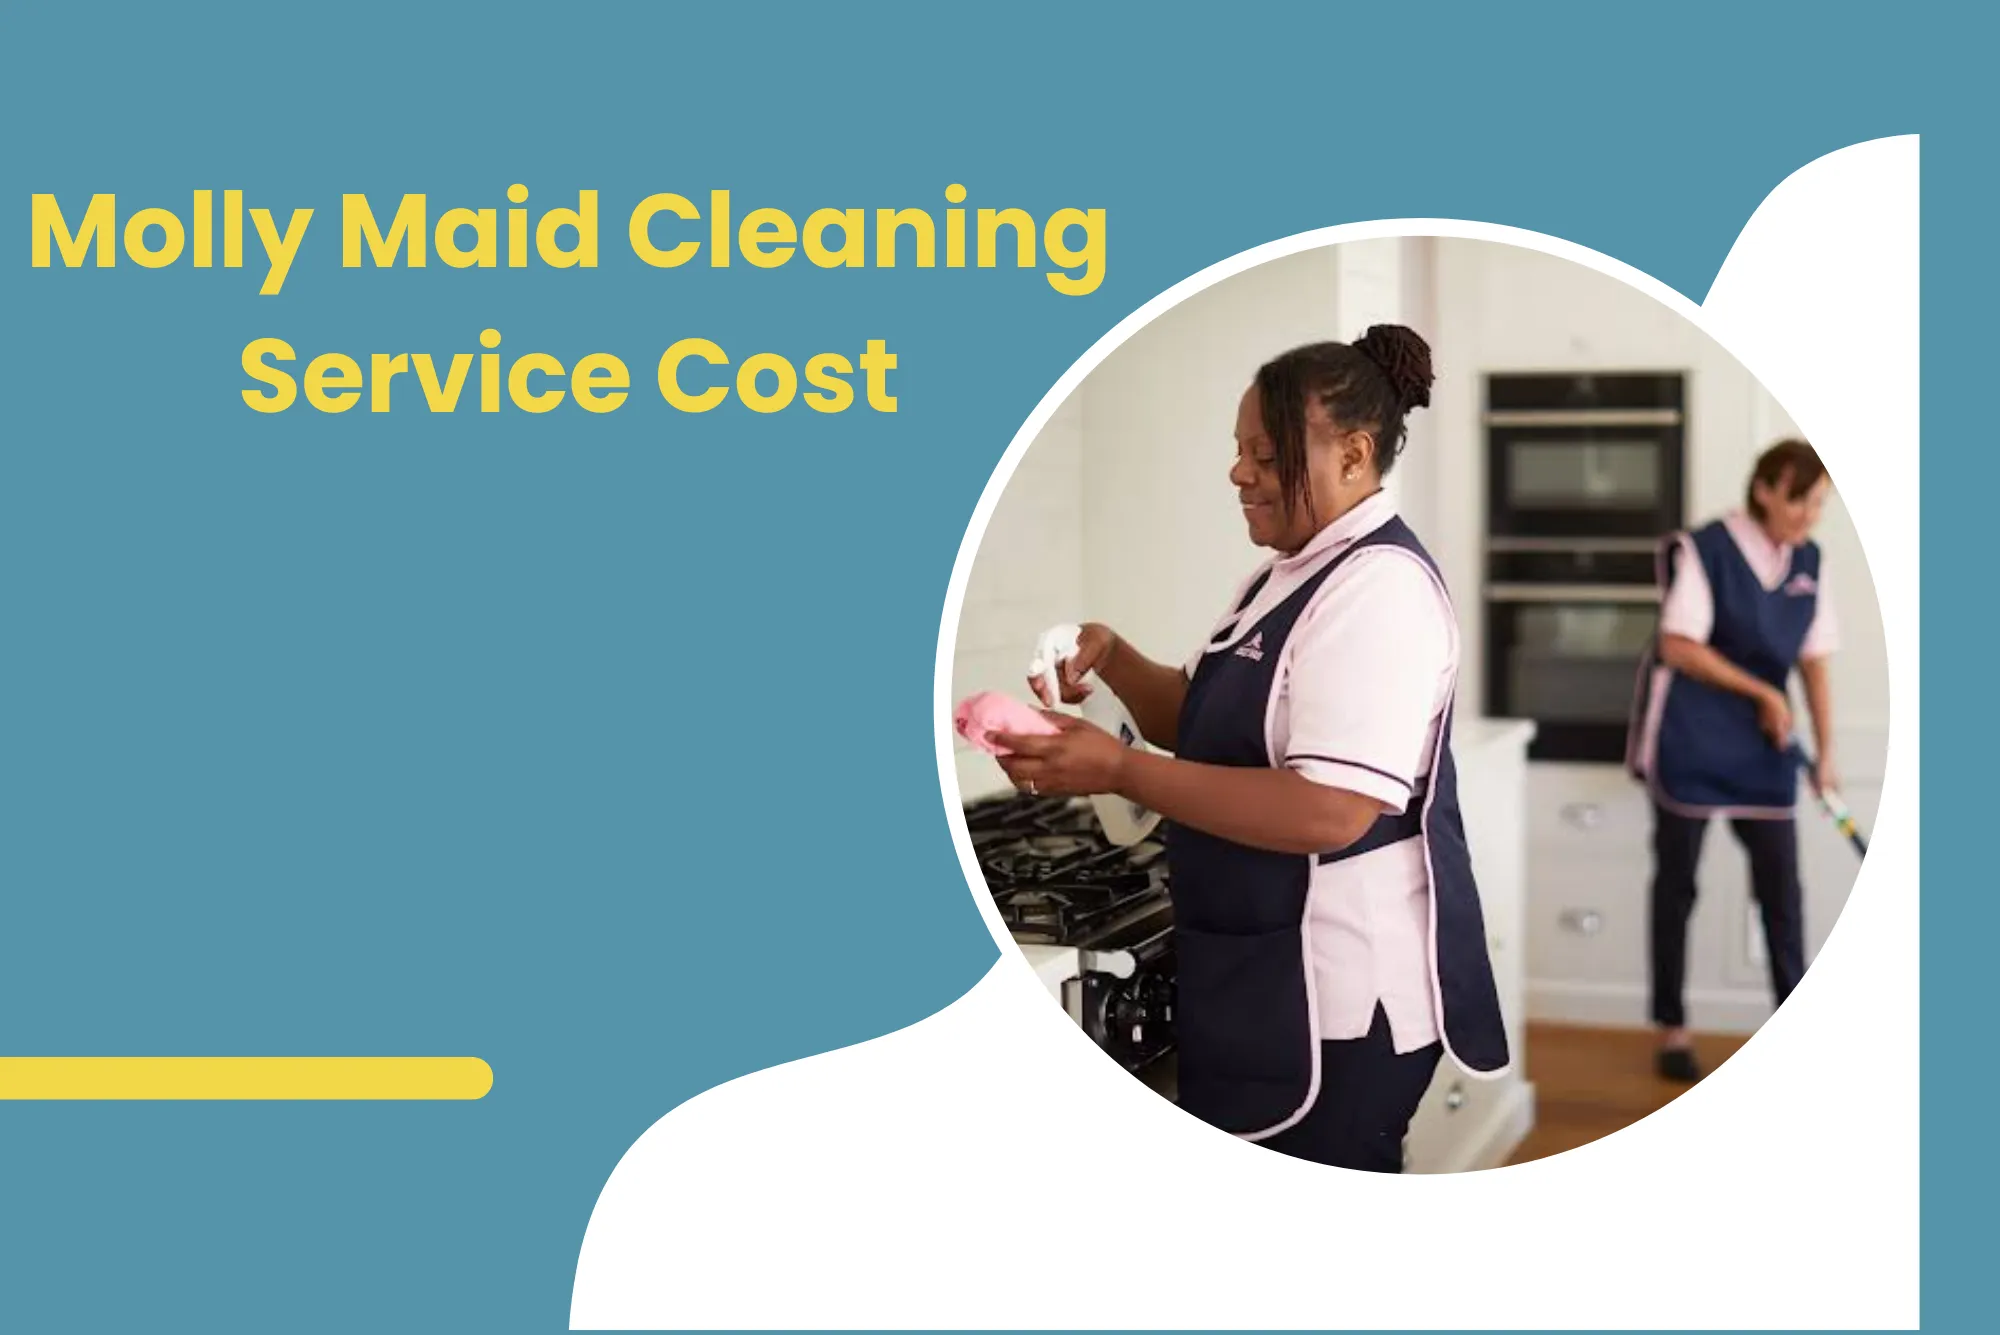 Molly Maid Cleaning Service Cost